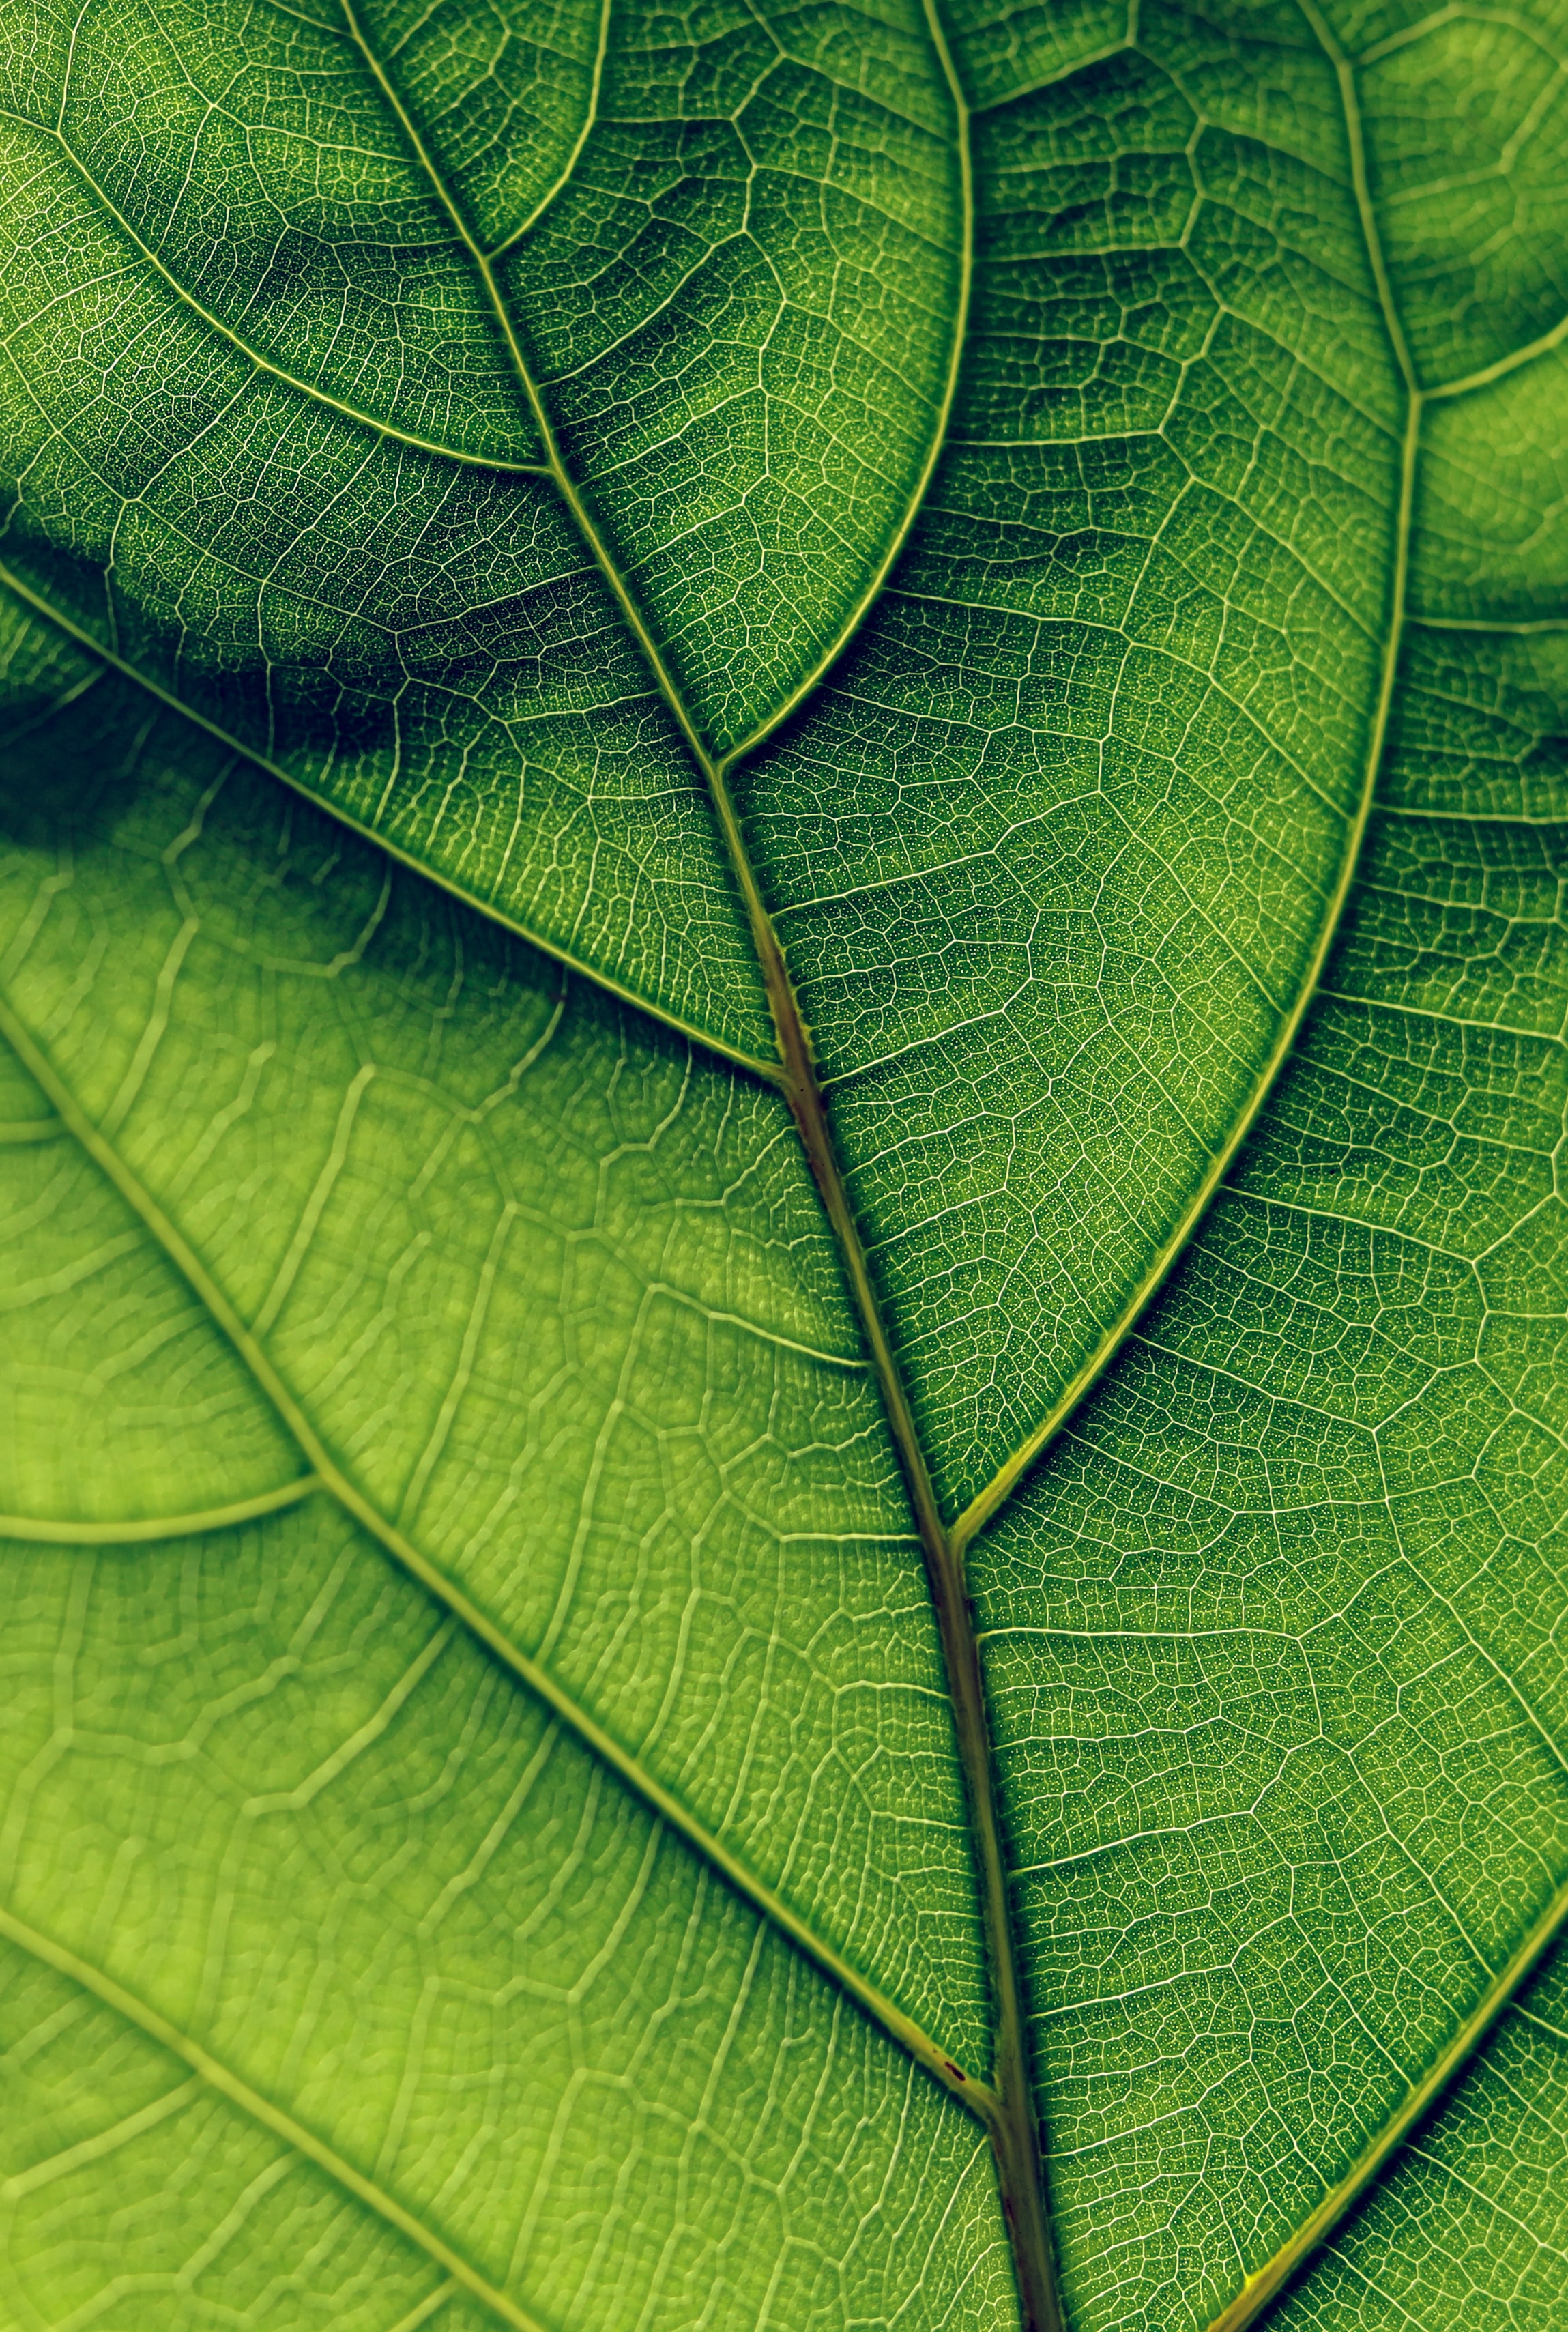 136486 free download Green wallpapers for phone, leaflet, surface, macro, veins Green images and screensavers for mobile